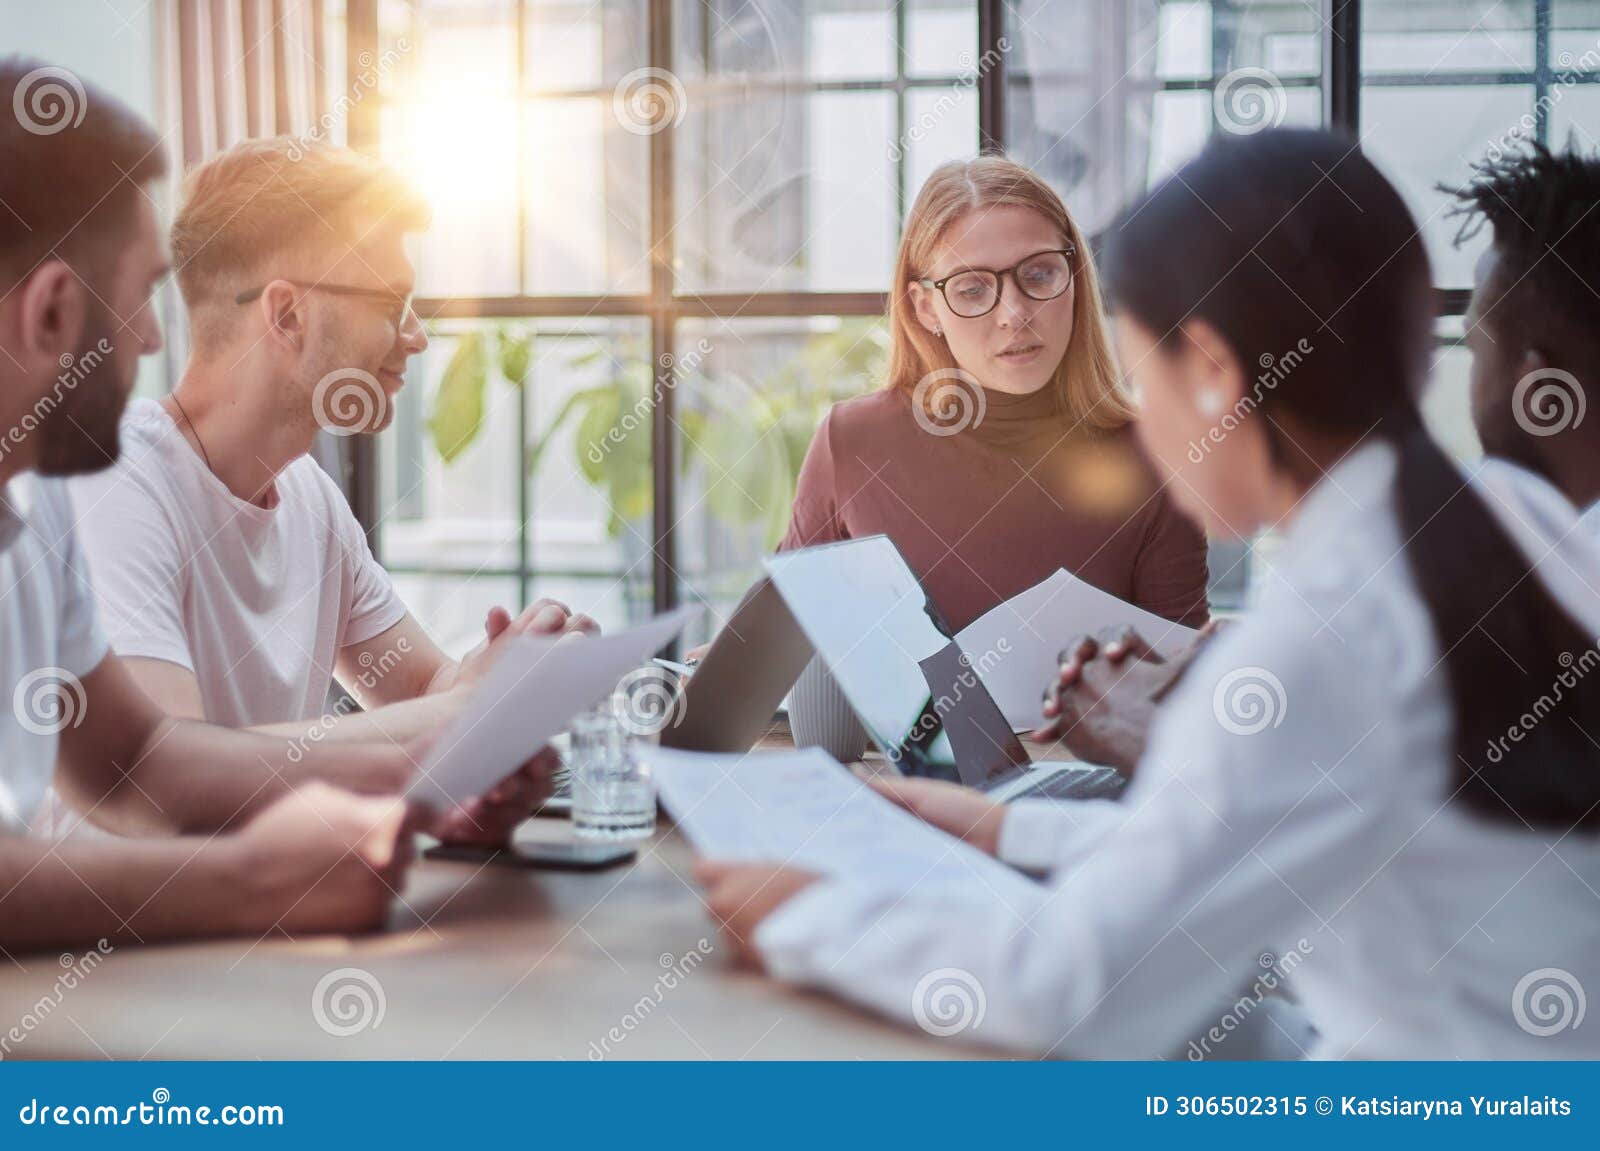 team working at desks in busy office